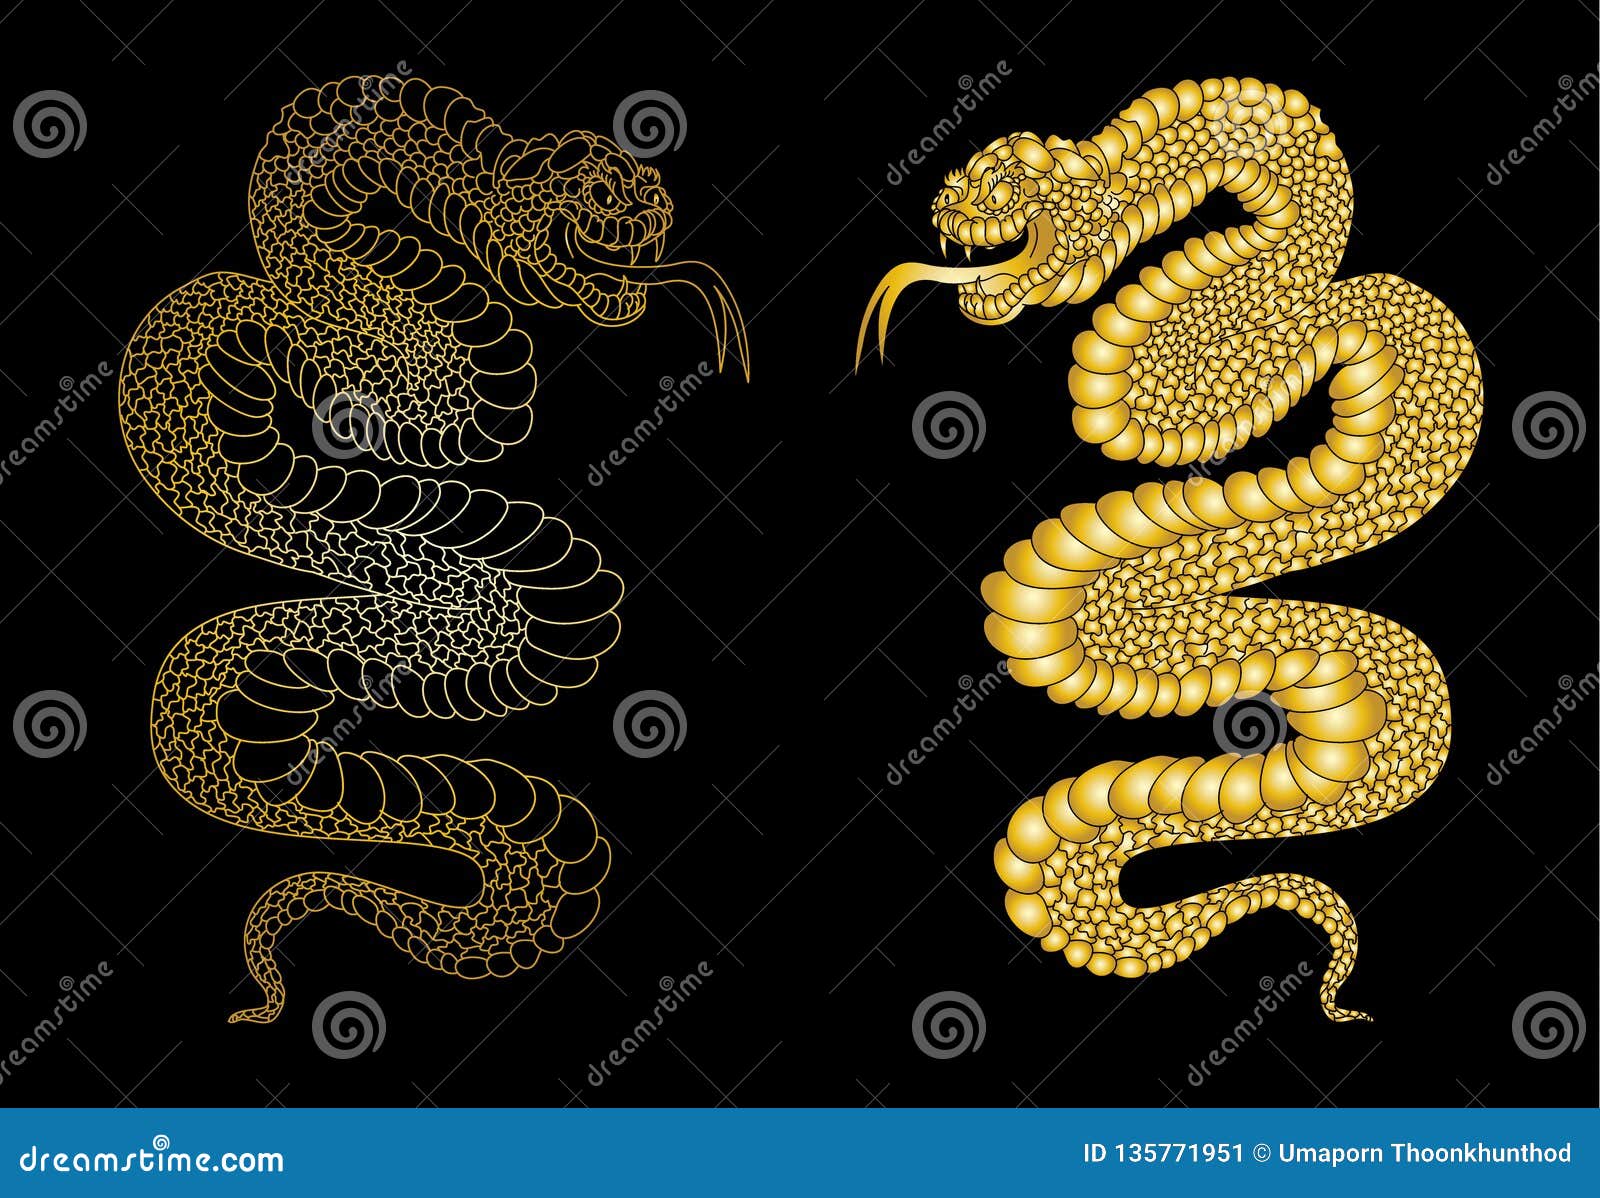 Japanese Snake Vector Tattoo for Printing.Black and White Sticker Fire Isolate on White Background. Stock Vector - Illustration of colud, bird: 135771951